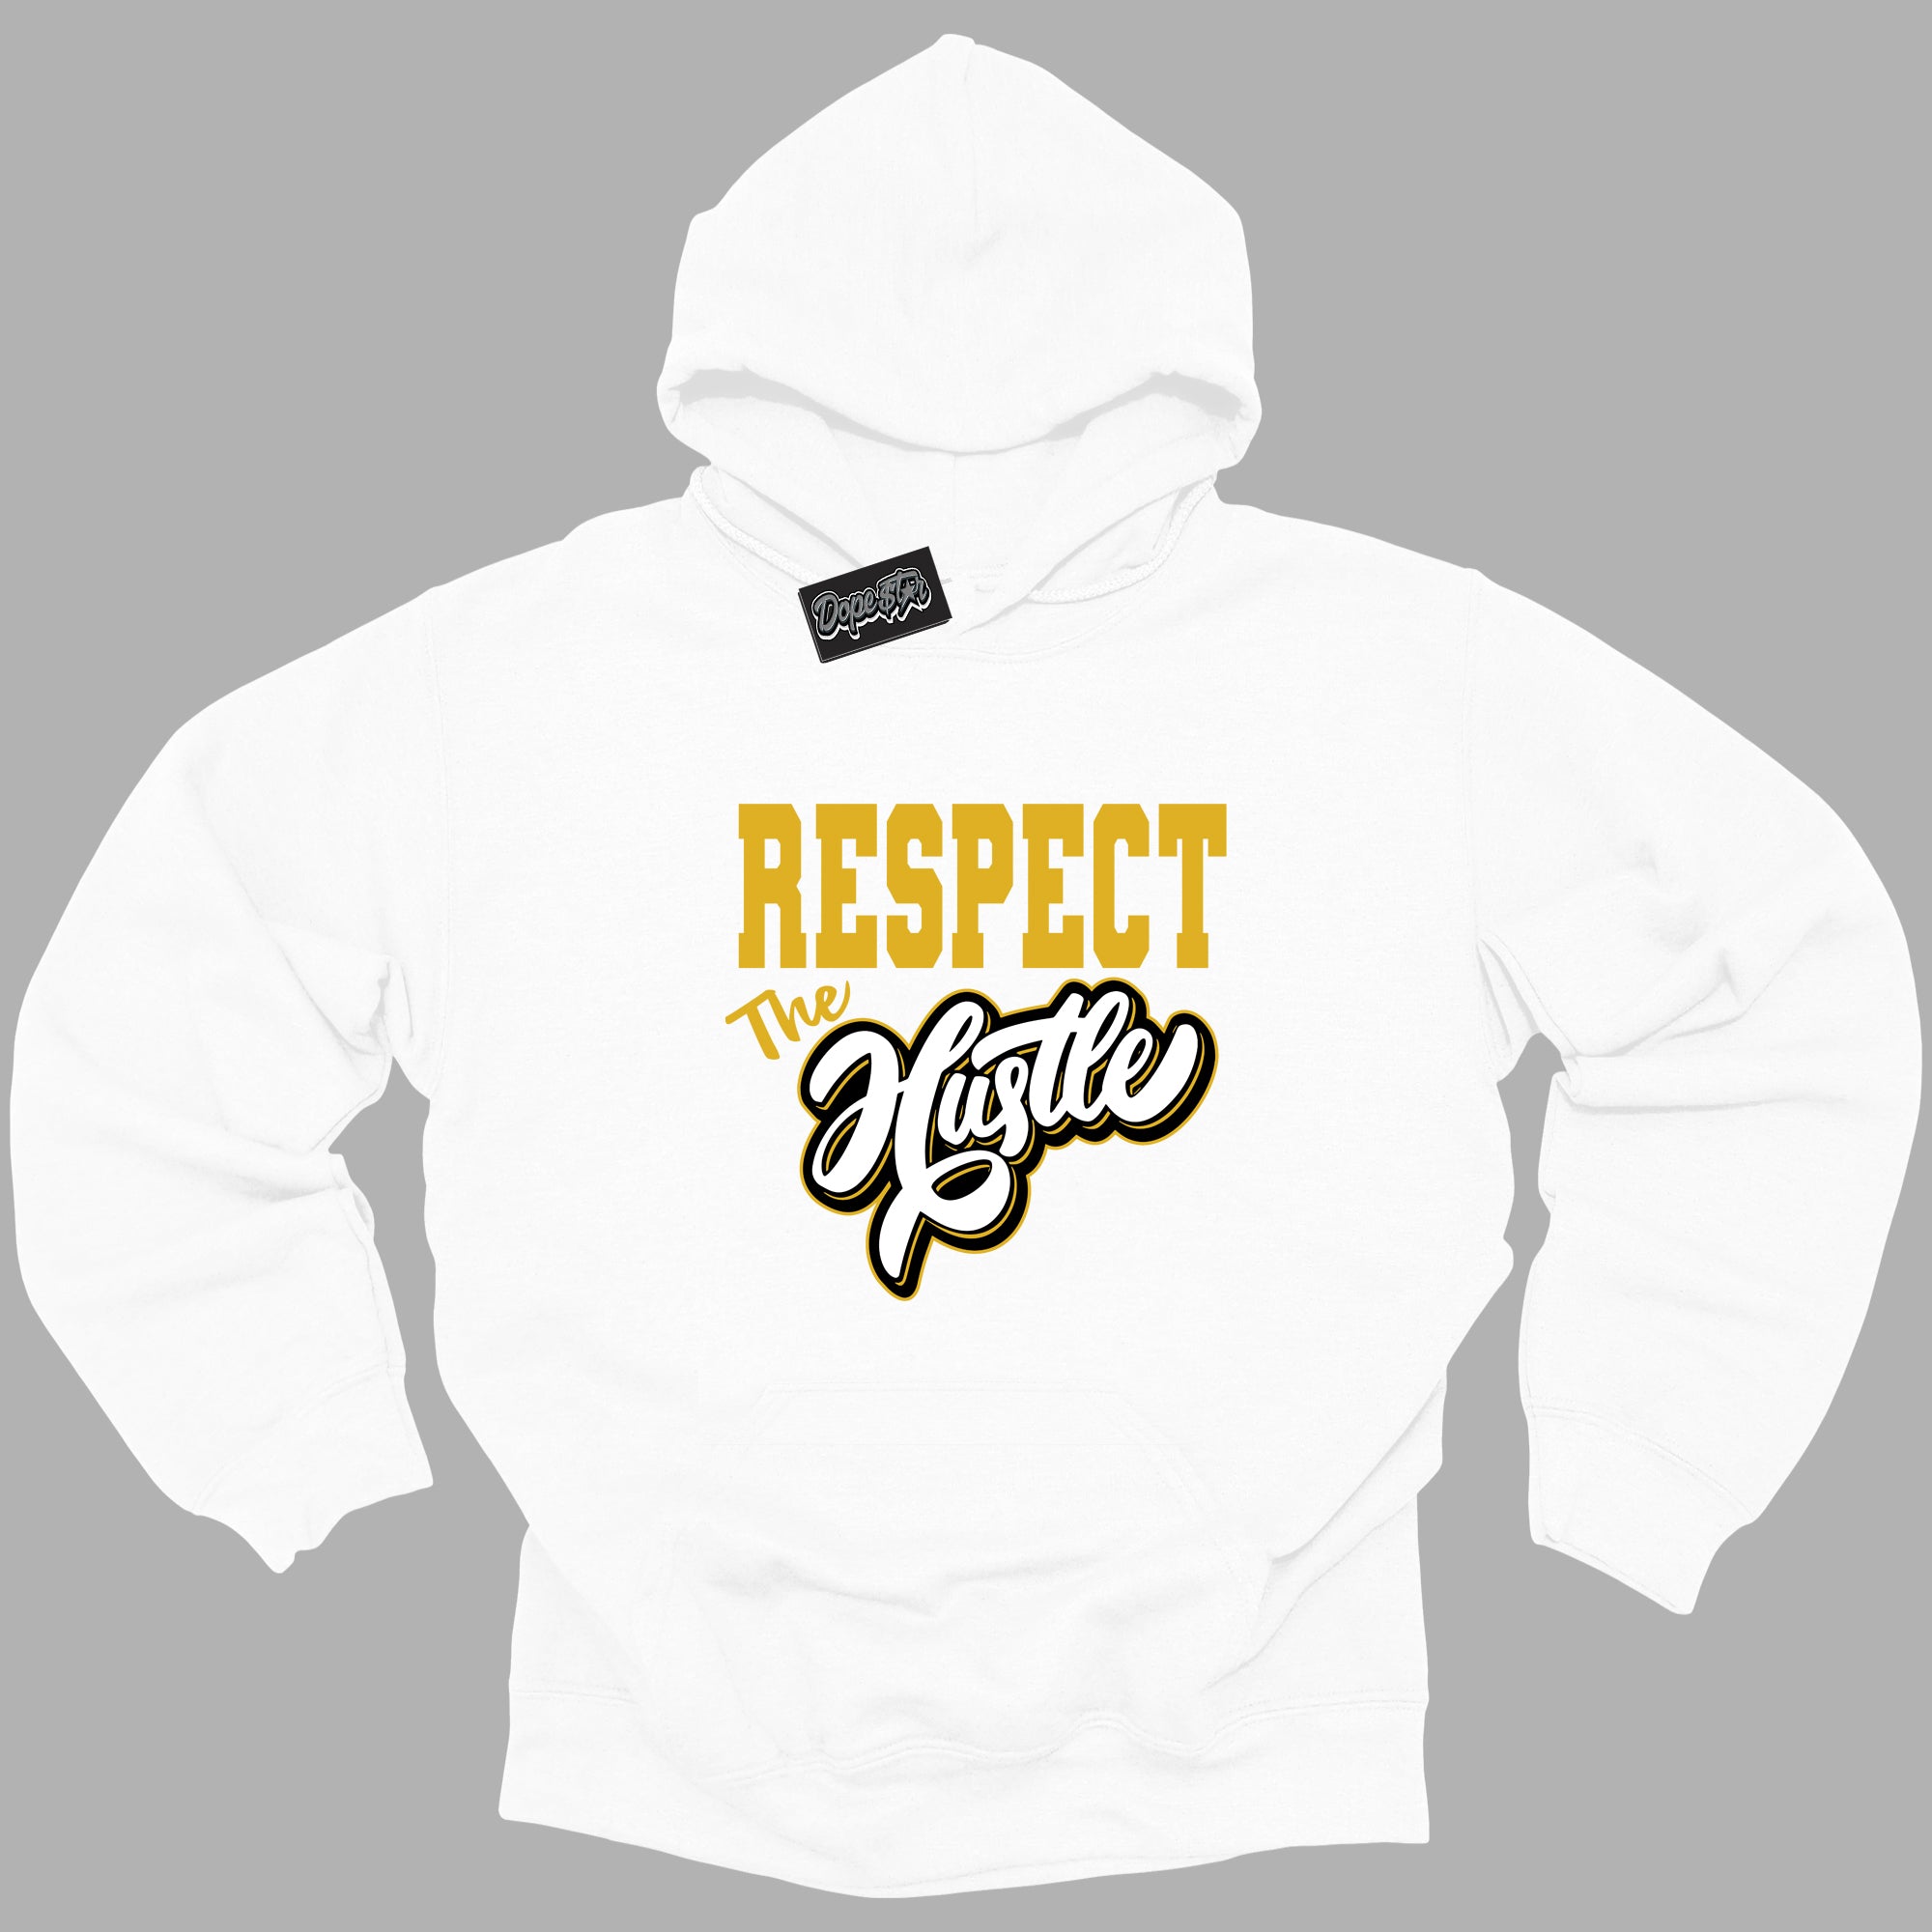 Cool White Hoodie with “Respect The Hustle ”  design that Perfectly Matches Yellow Ochre 6s Sneakers.